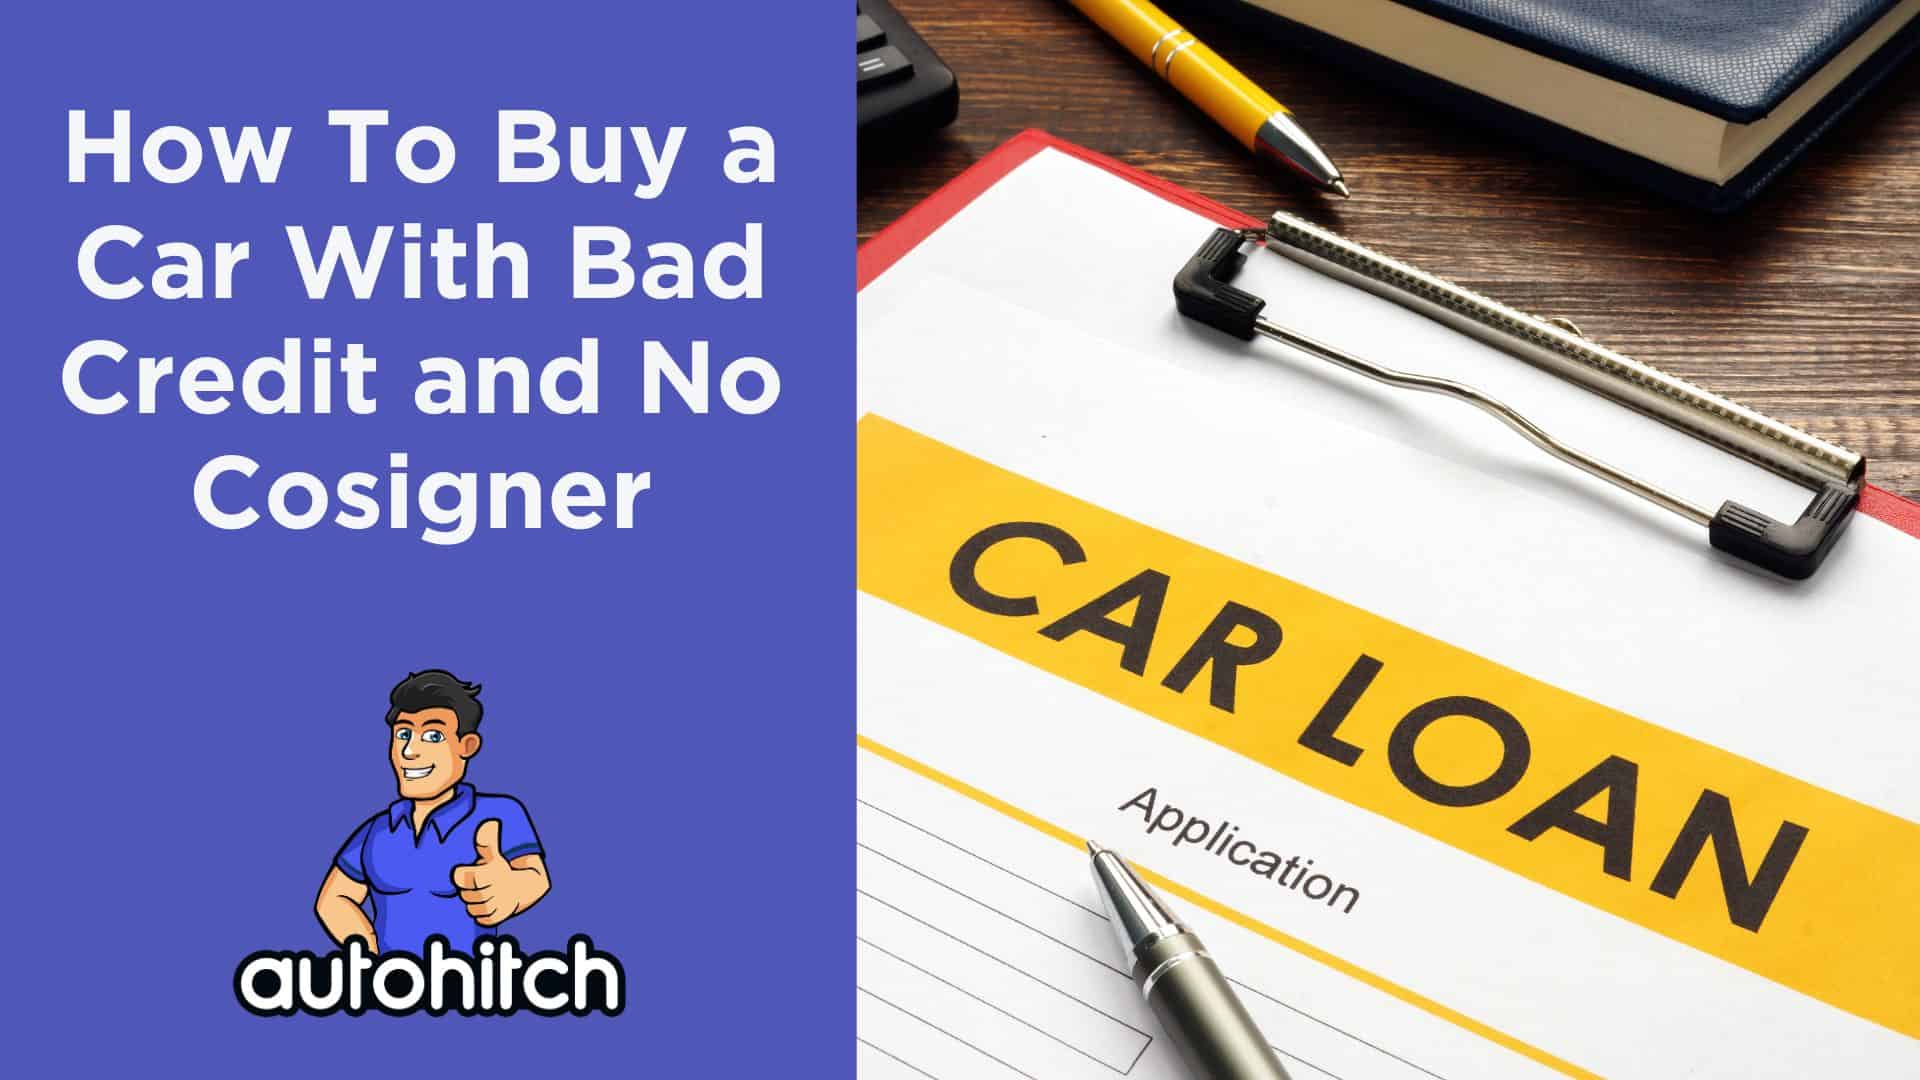 How To Buy a Car With Bad Credit and No Cosigner